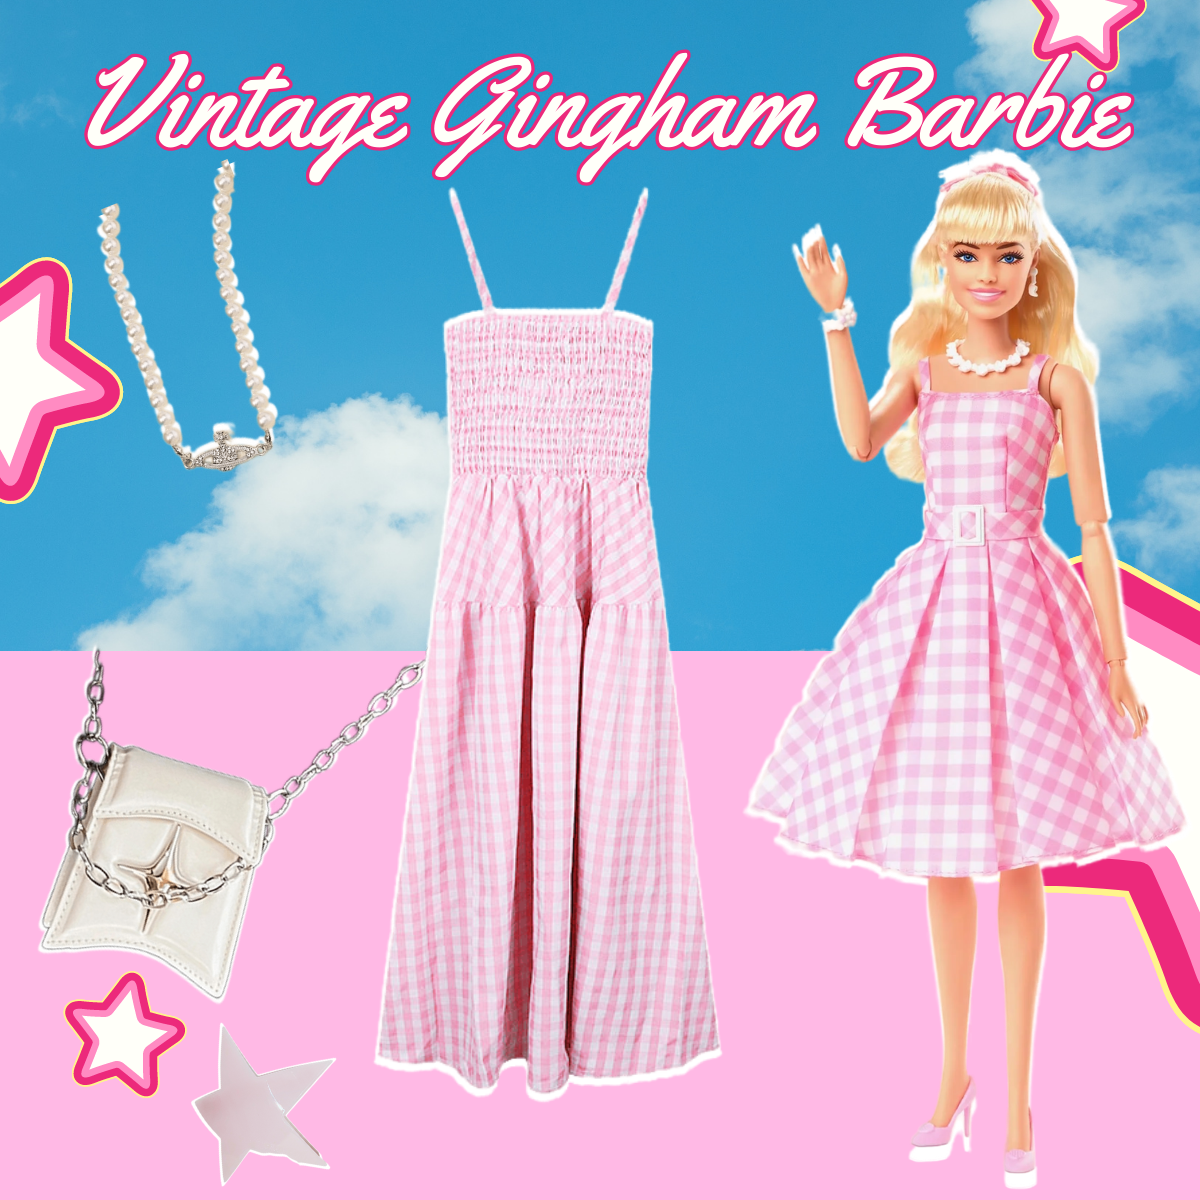 Capturing the Barbie Magic: Fashion Inspiration for Every Occasion